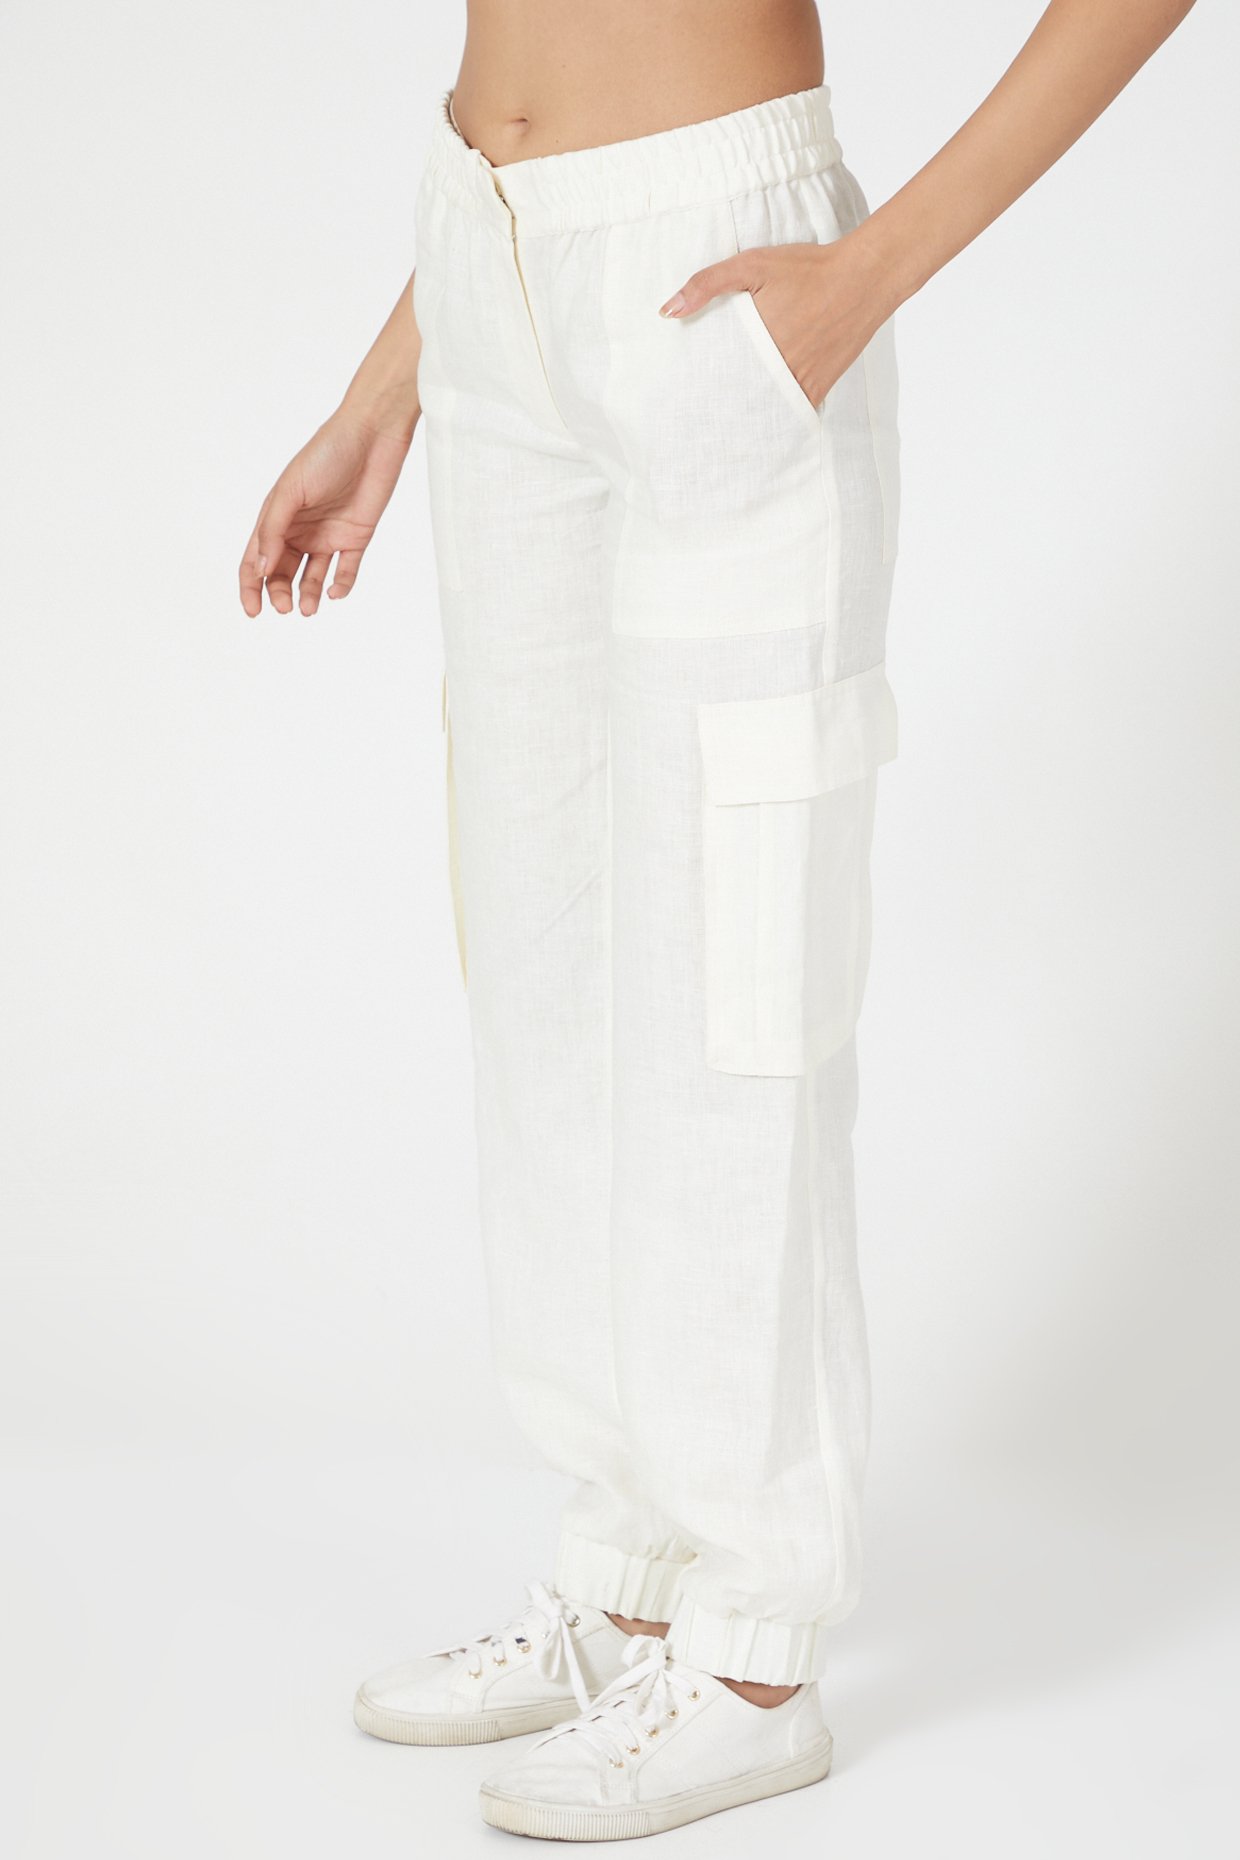 Buy Go Colors Off White Cargo Pant Online